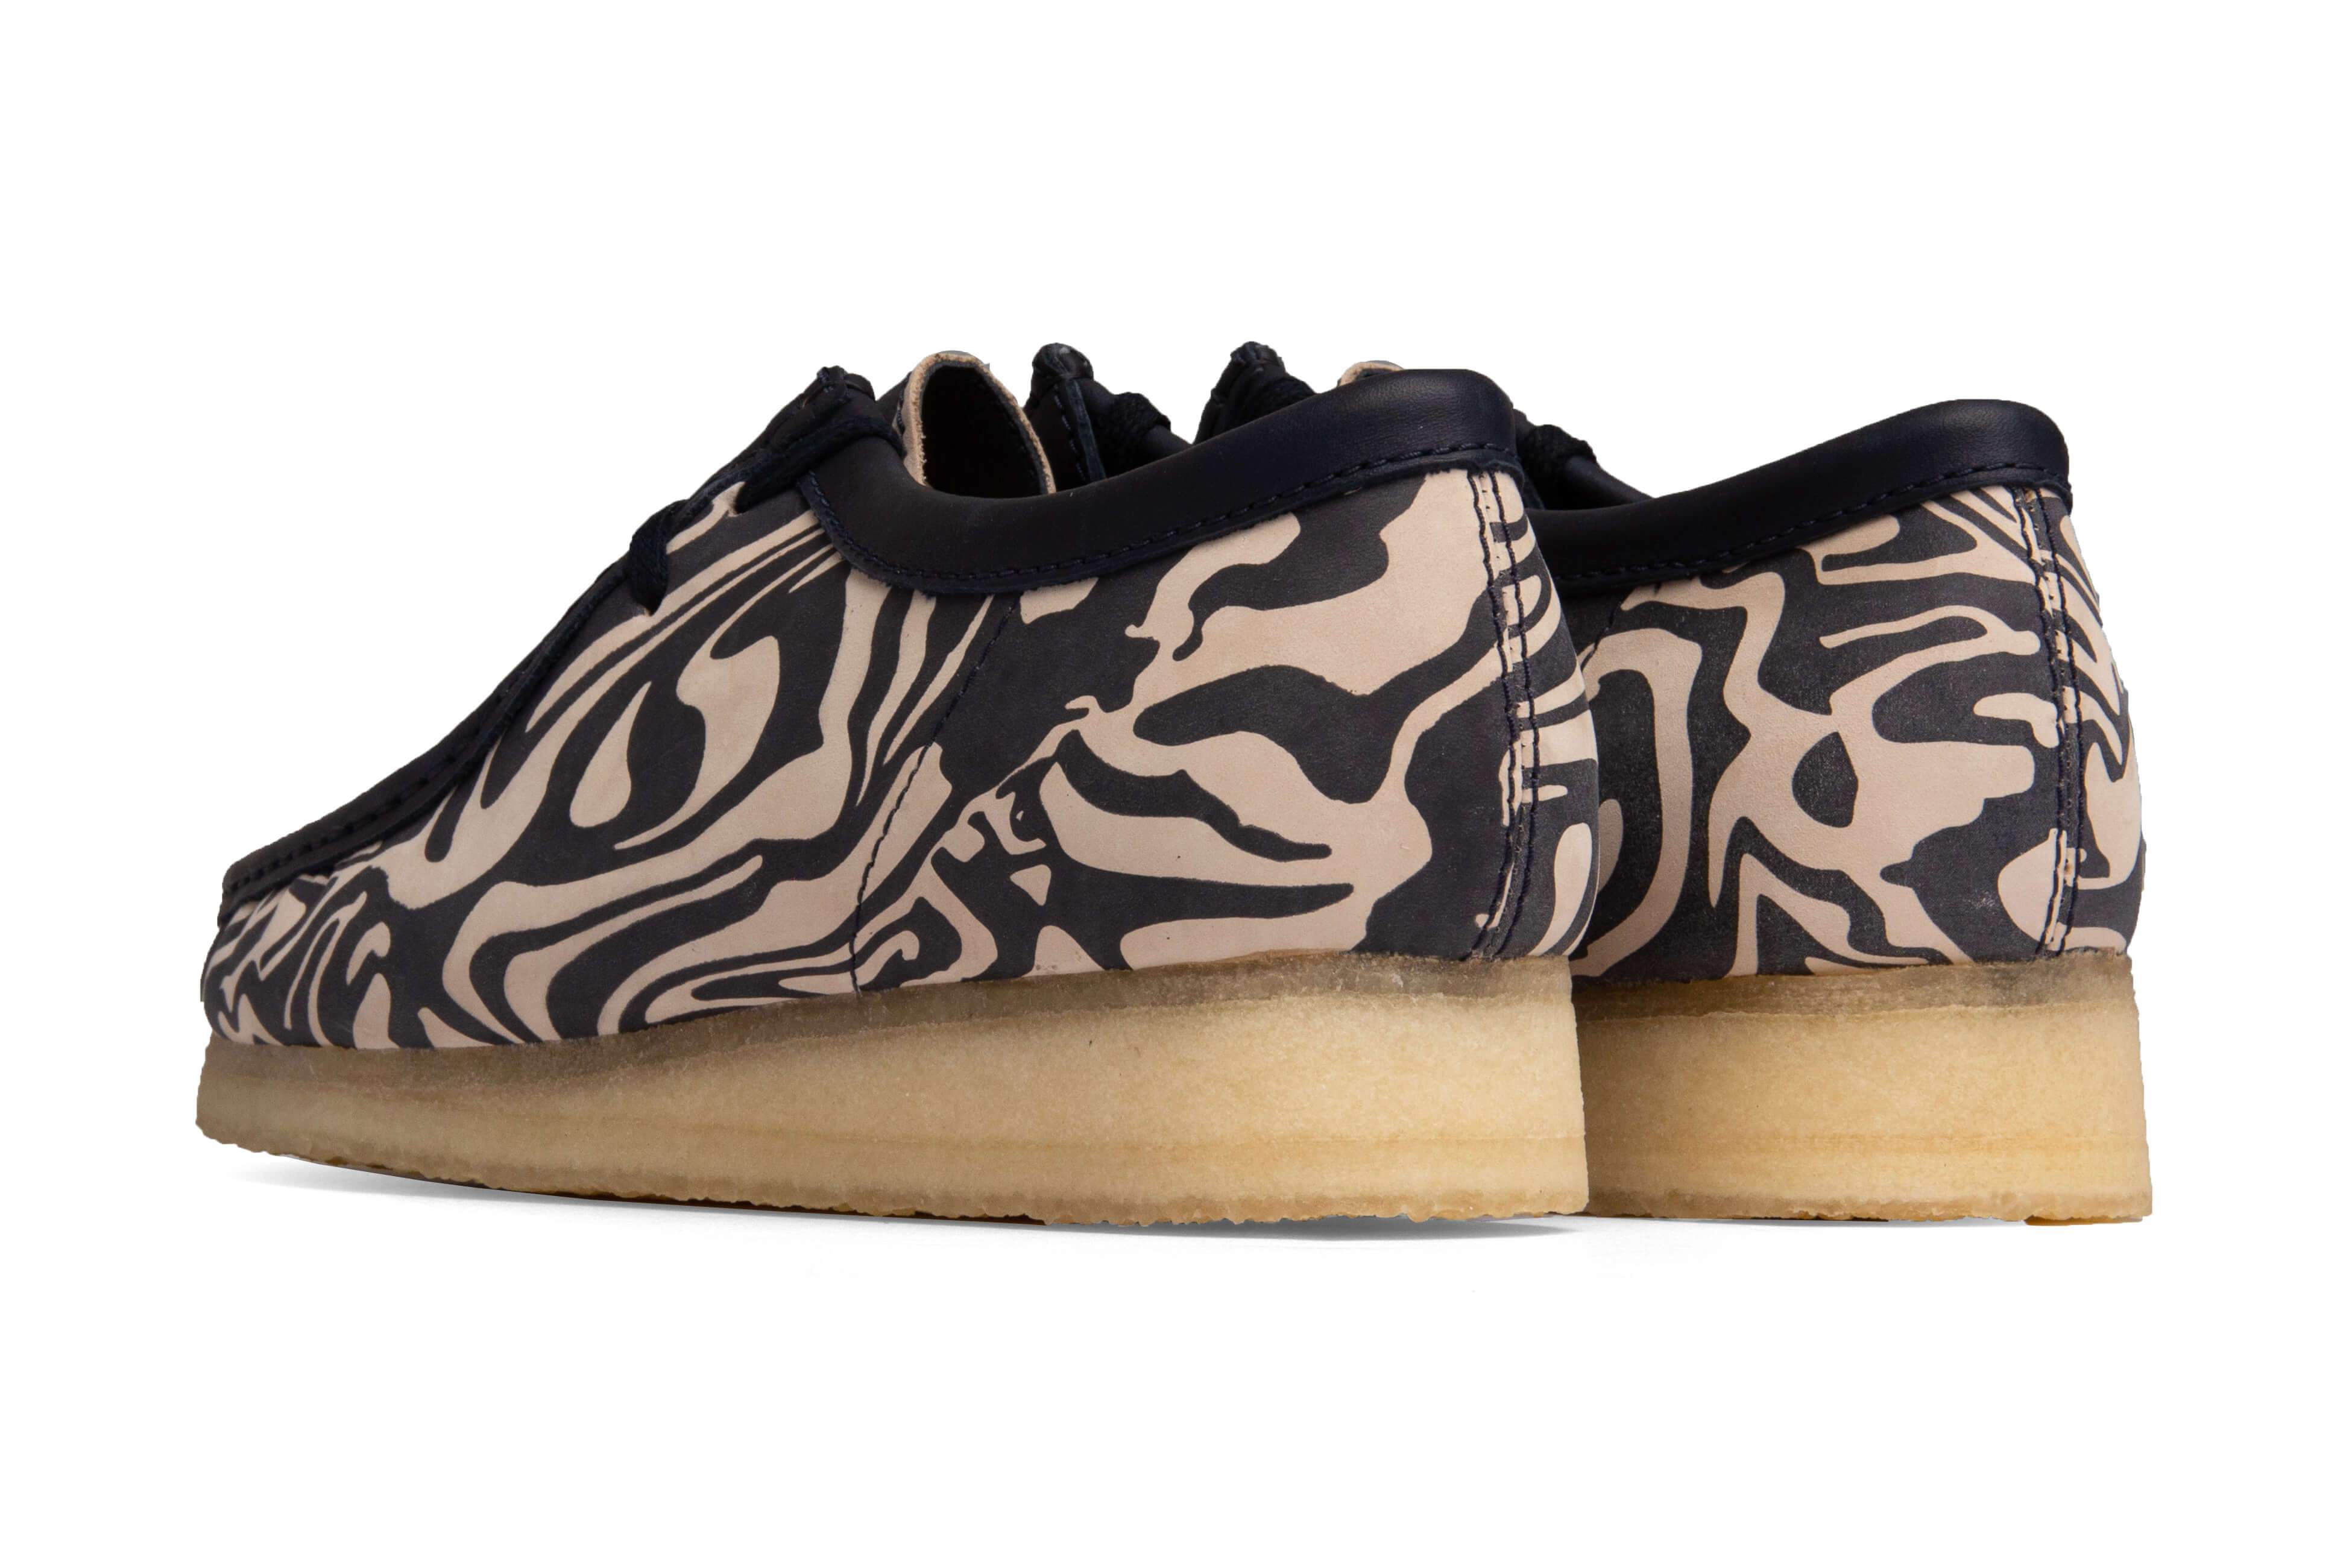 Wu Tang X Clarks Wallabee Navy Multi by Clarks Originals